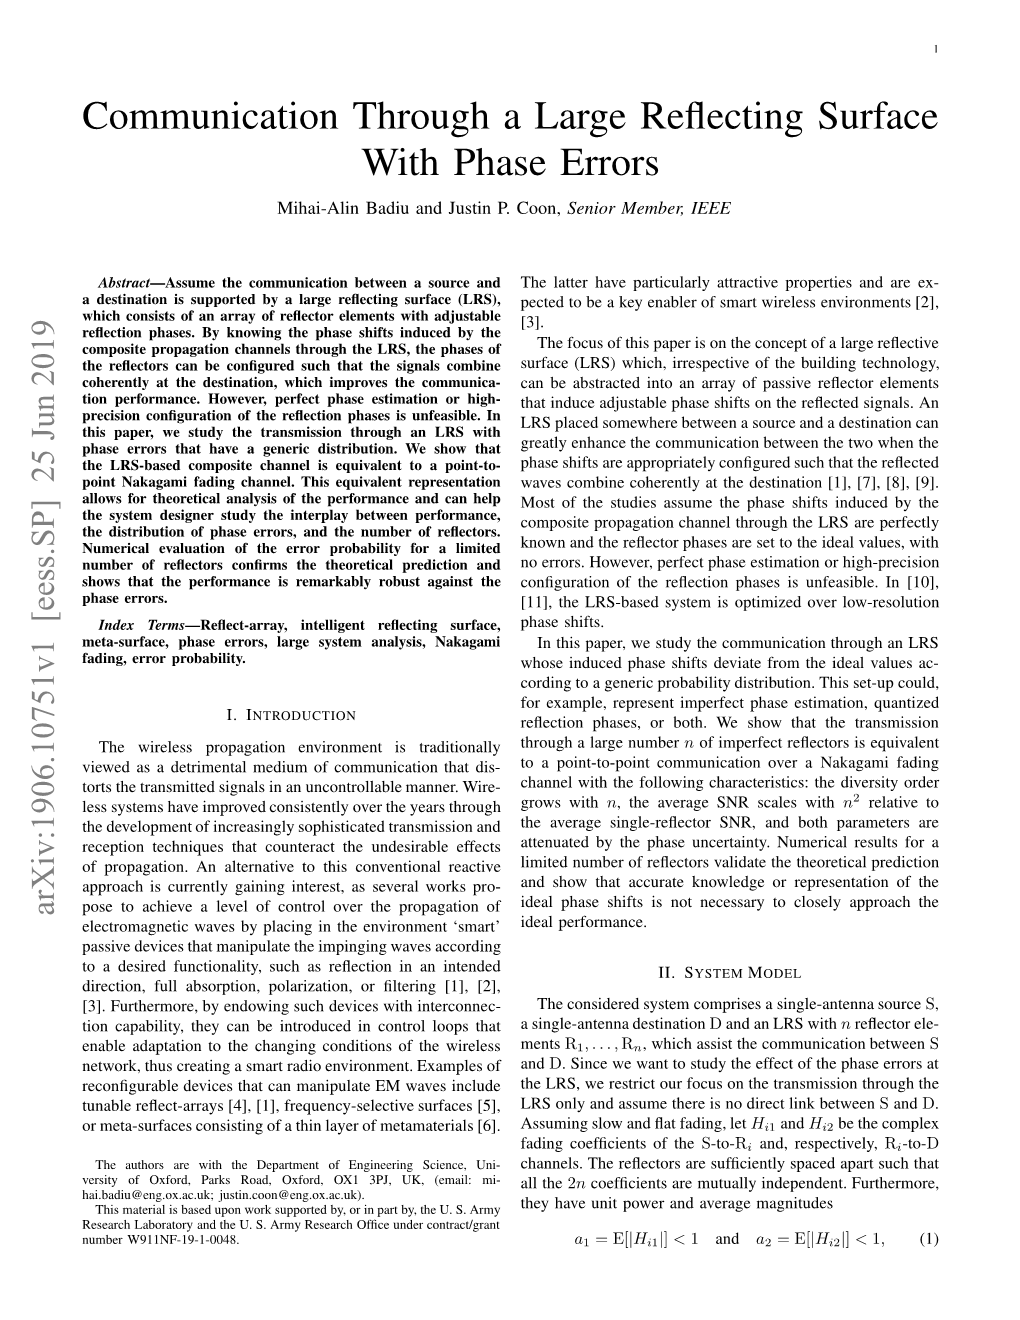 Communication Through a Large Reflecting Surface with Phase Errors